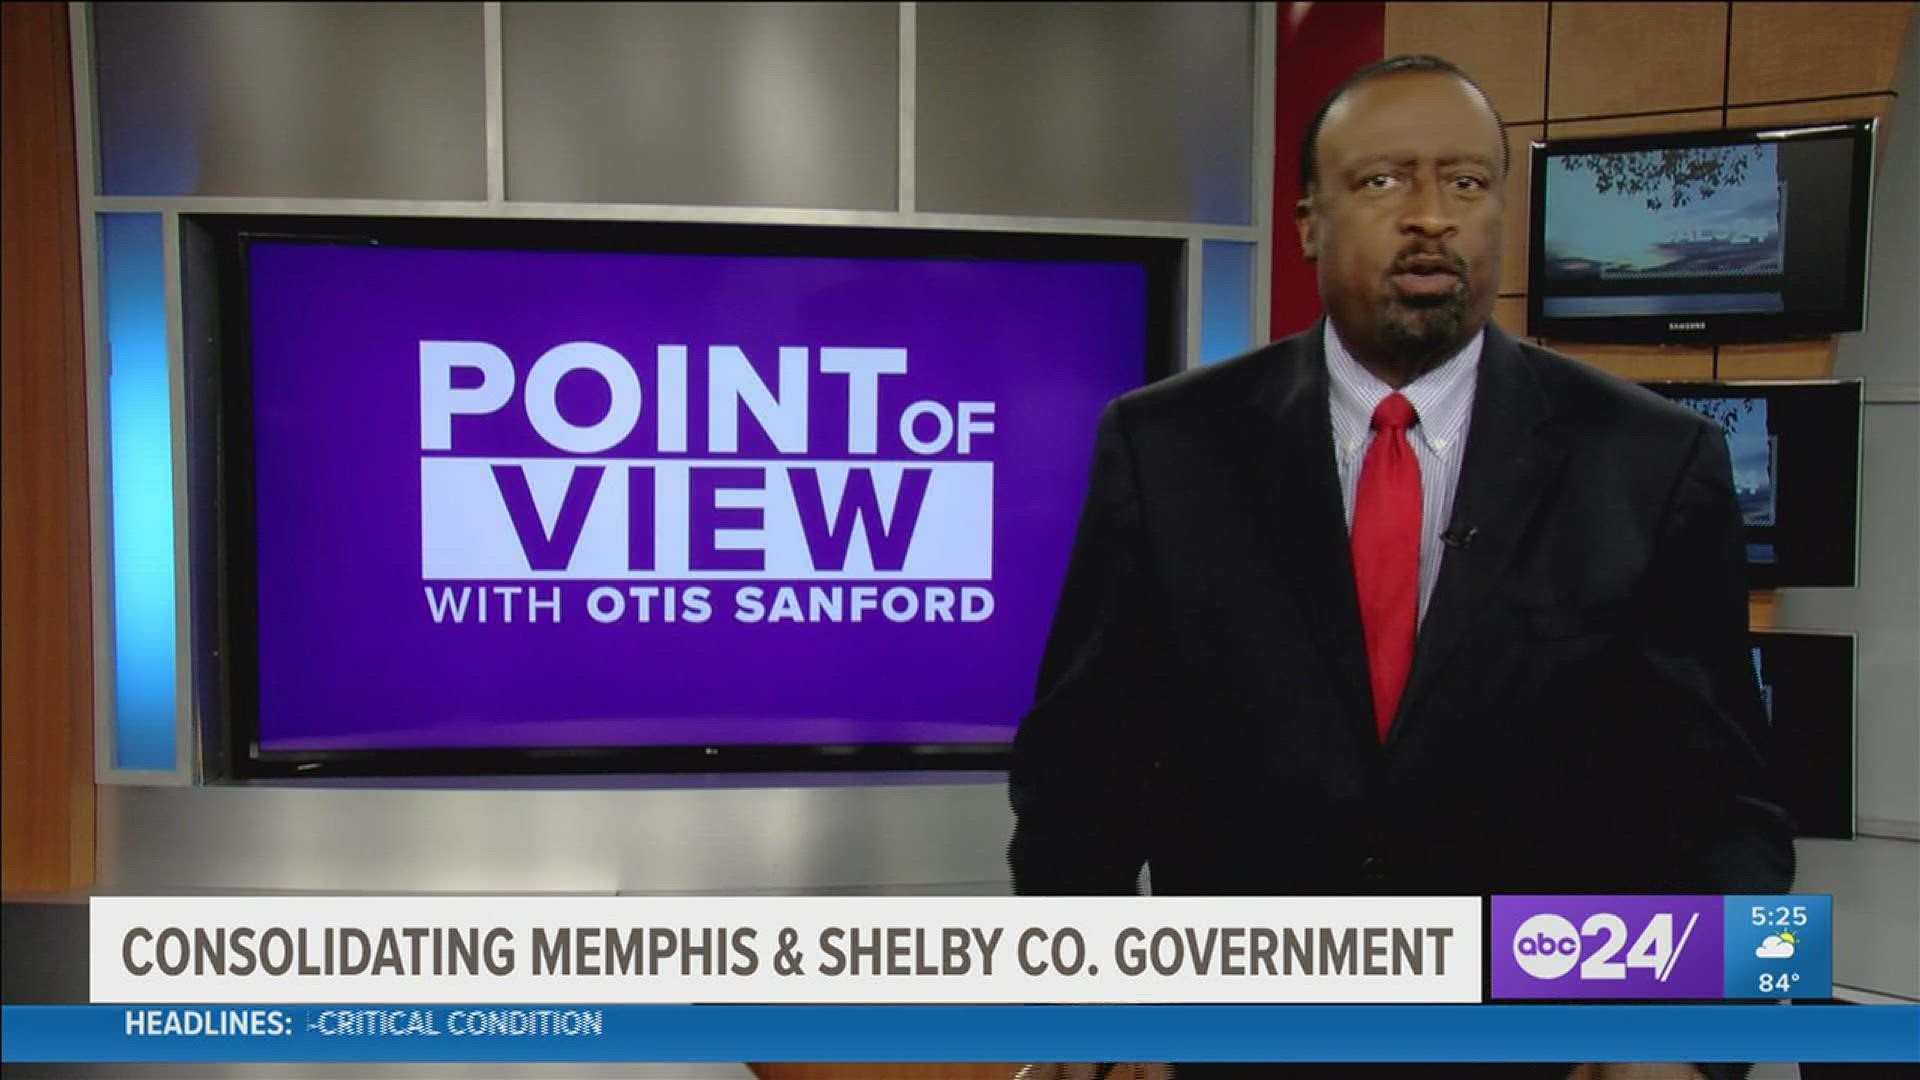 Political analyst and commentator Otis Sanford shared his point of view on the renewed efforts to consolidate Memphis and Shelby County governments.